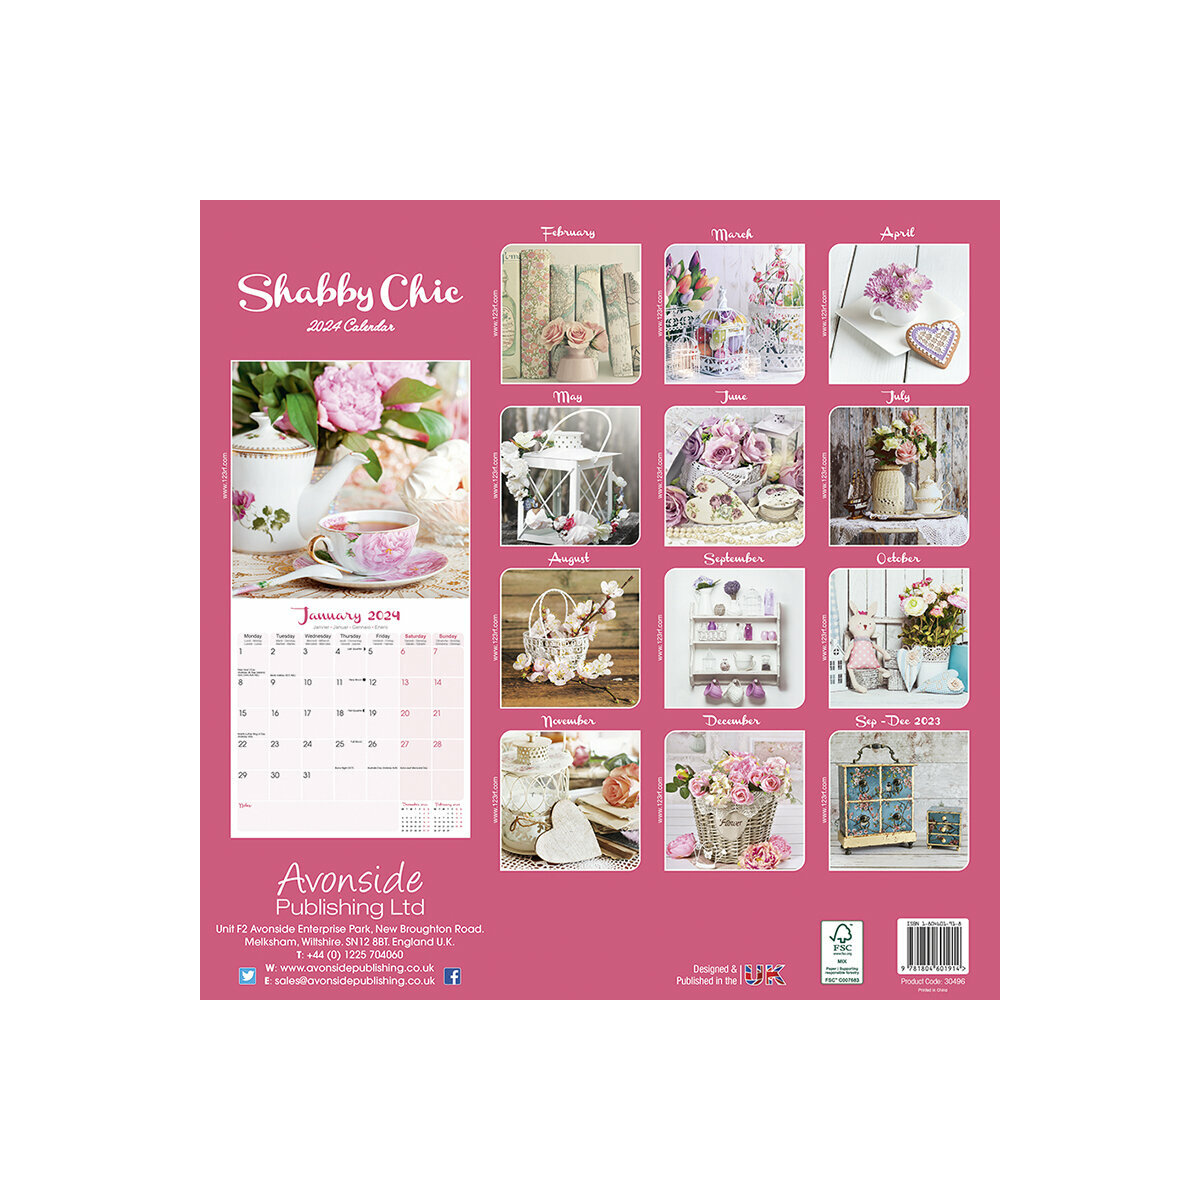 Calendrier Shabby Chic 2024 